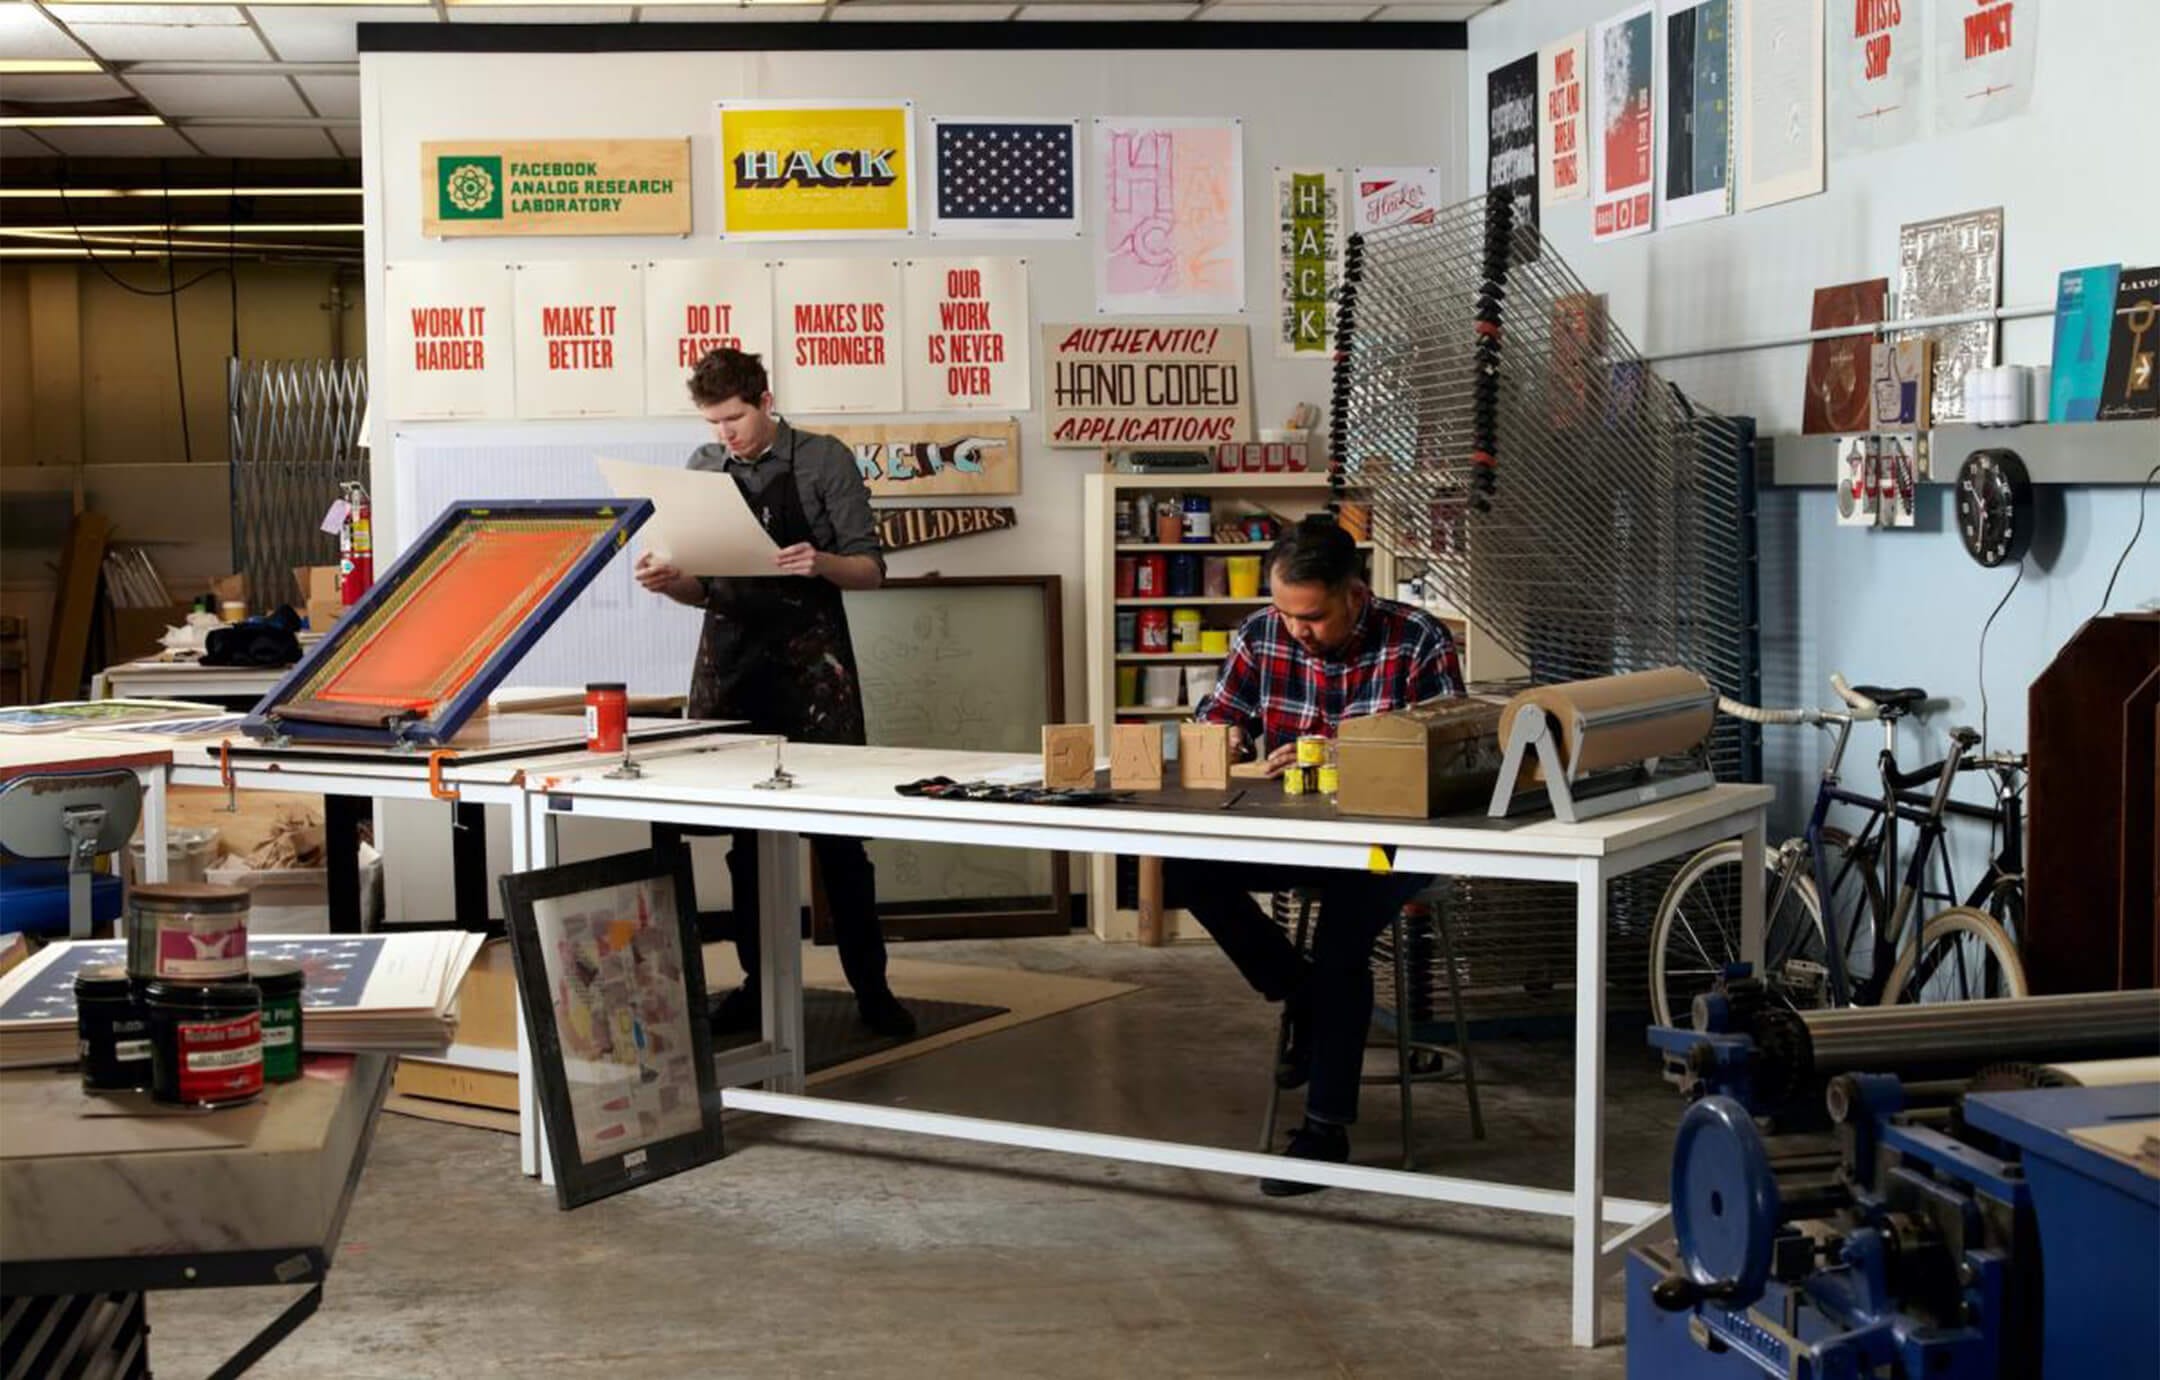 Designers Ben Barry and Everett Katigbak in the Facebook Analog Research Laboratory, ca. 2011